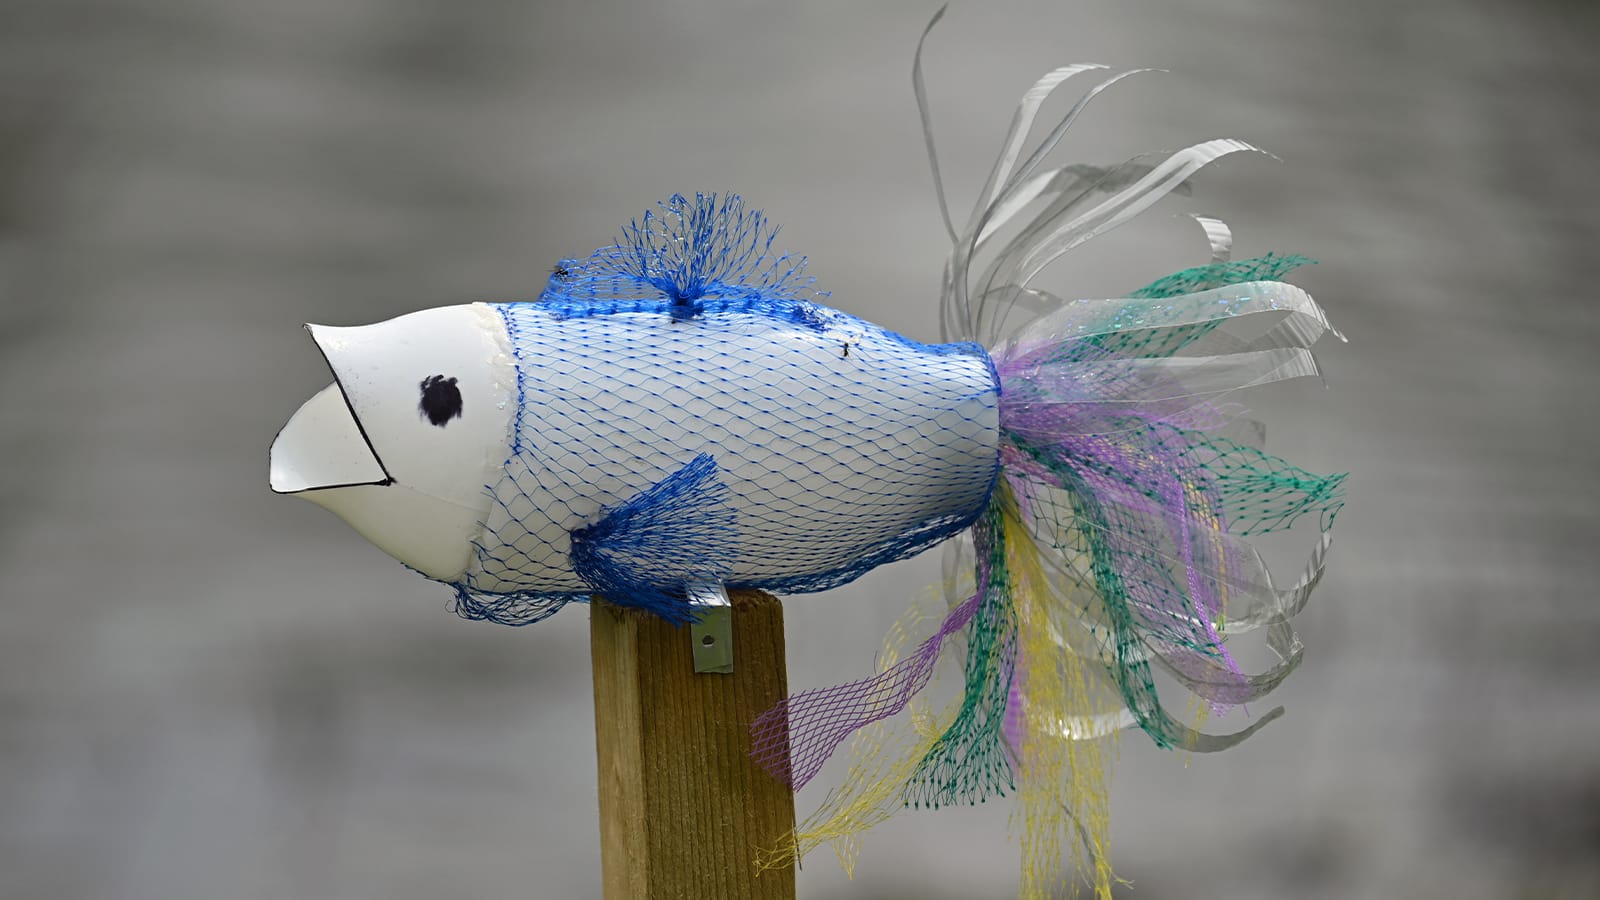 A fish made from an old plastic bottle